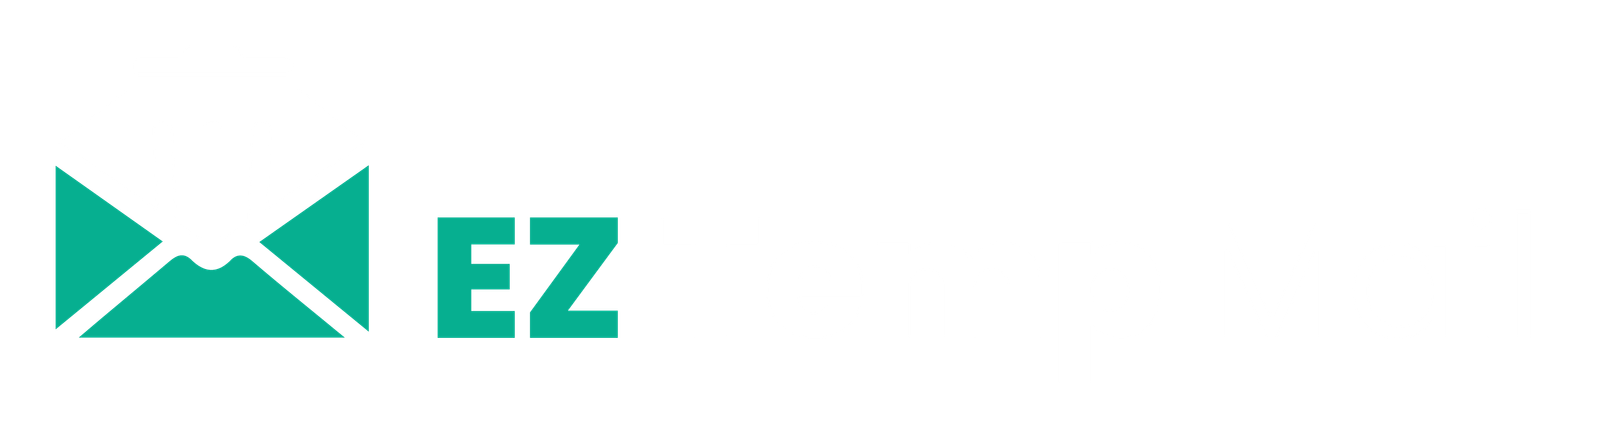 EZ Temp Mail - Create Fast and Spam-Free Disposable Email